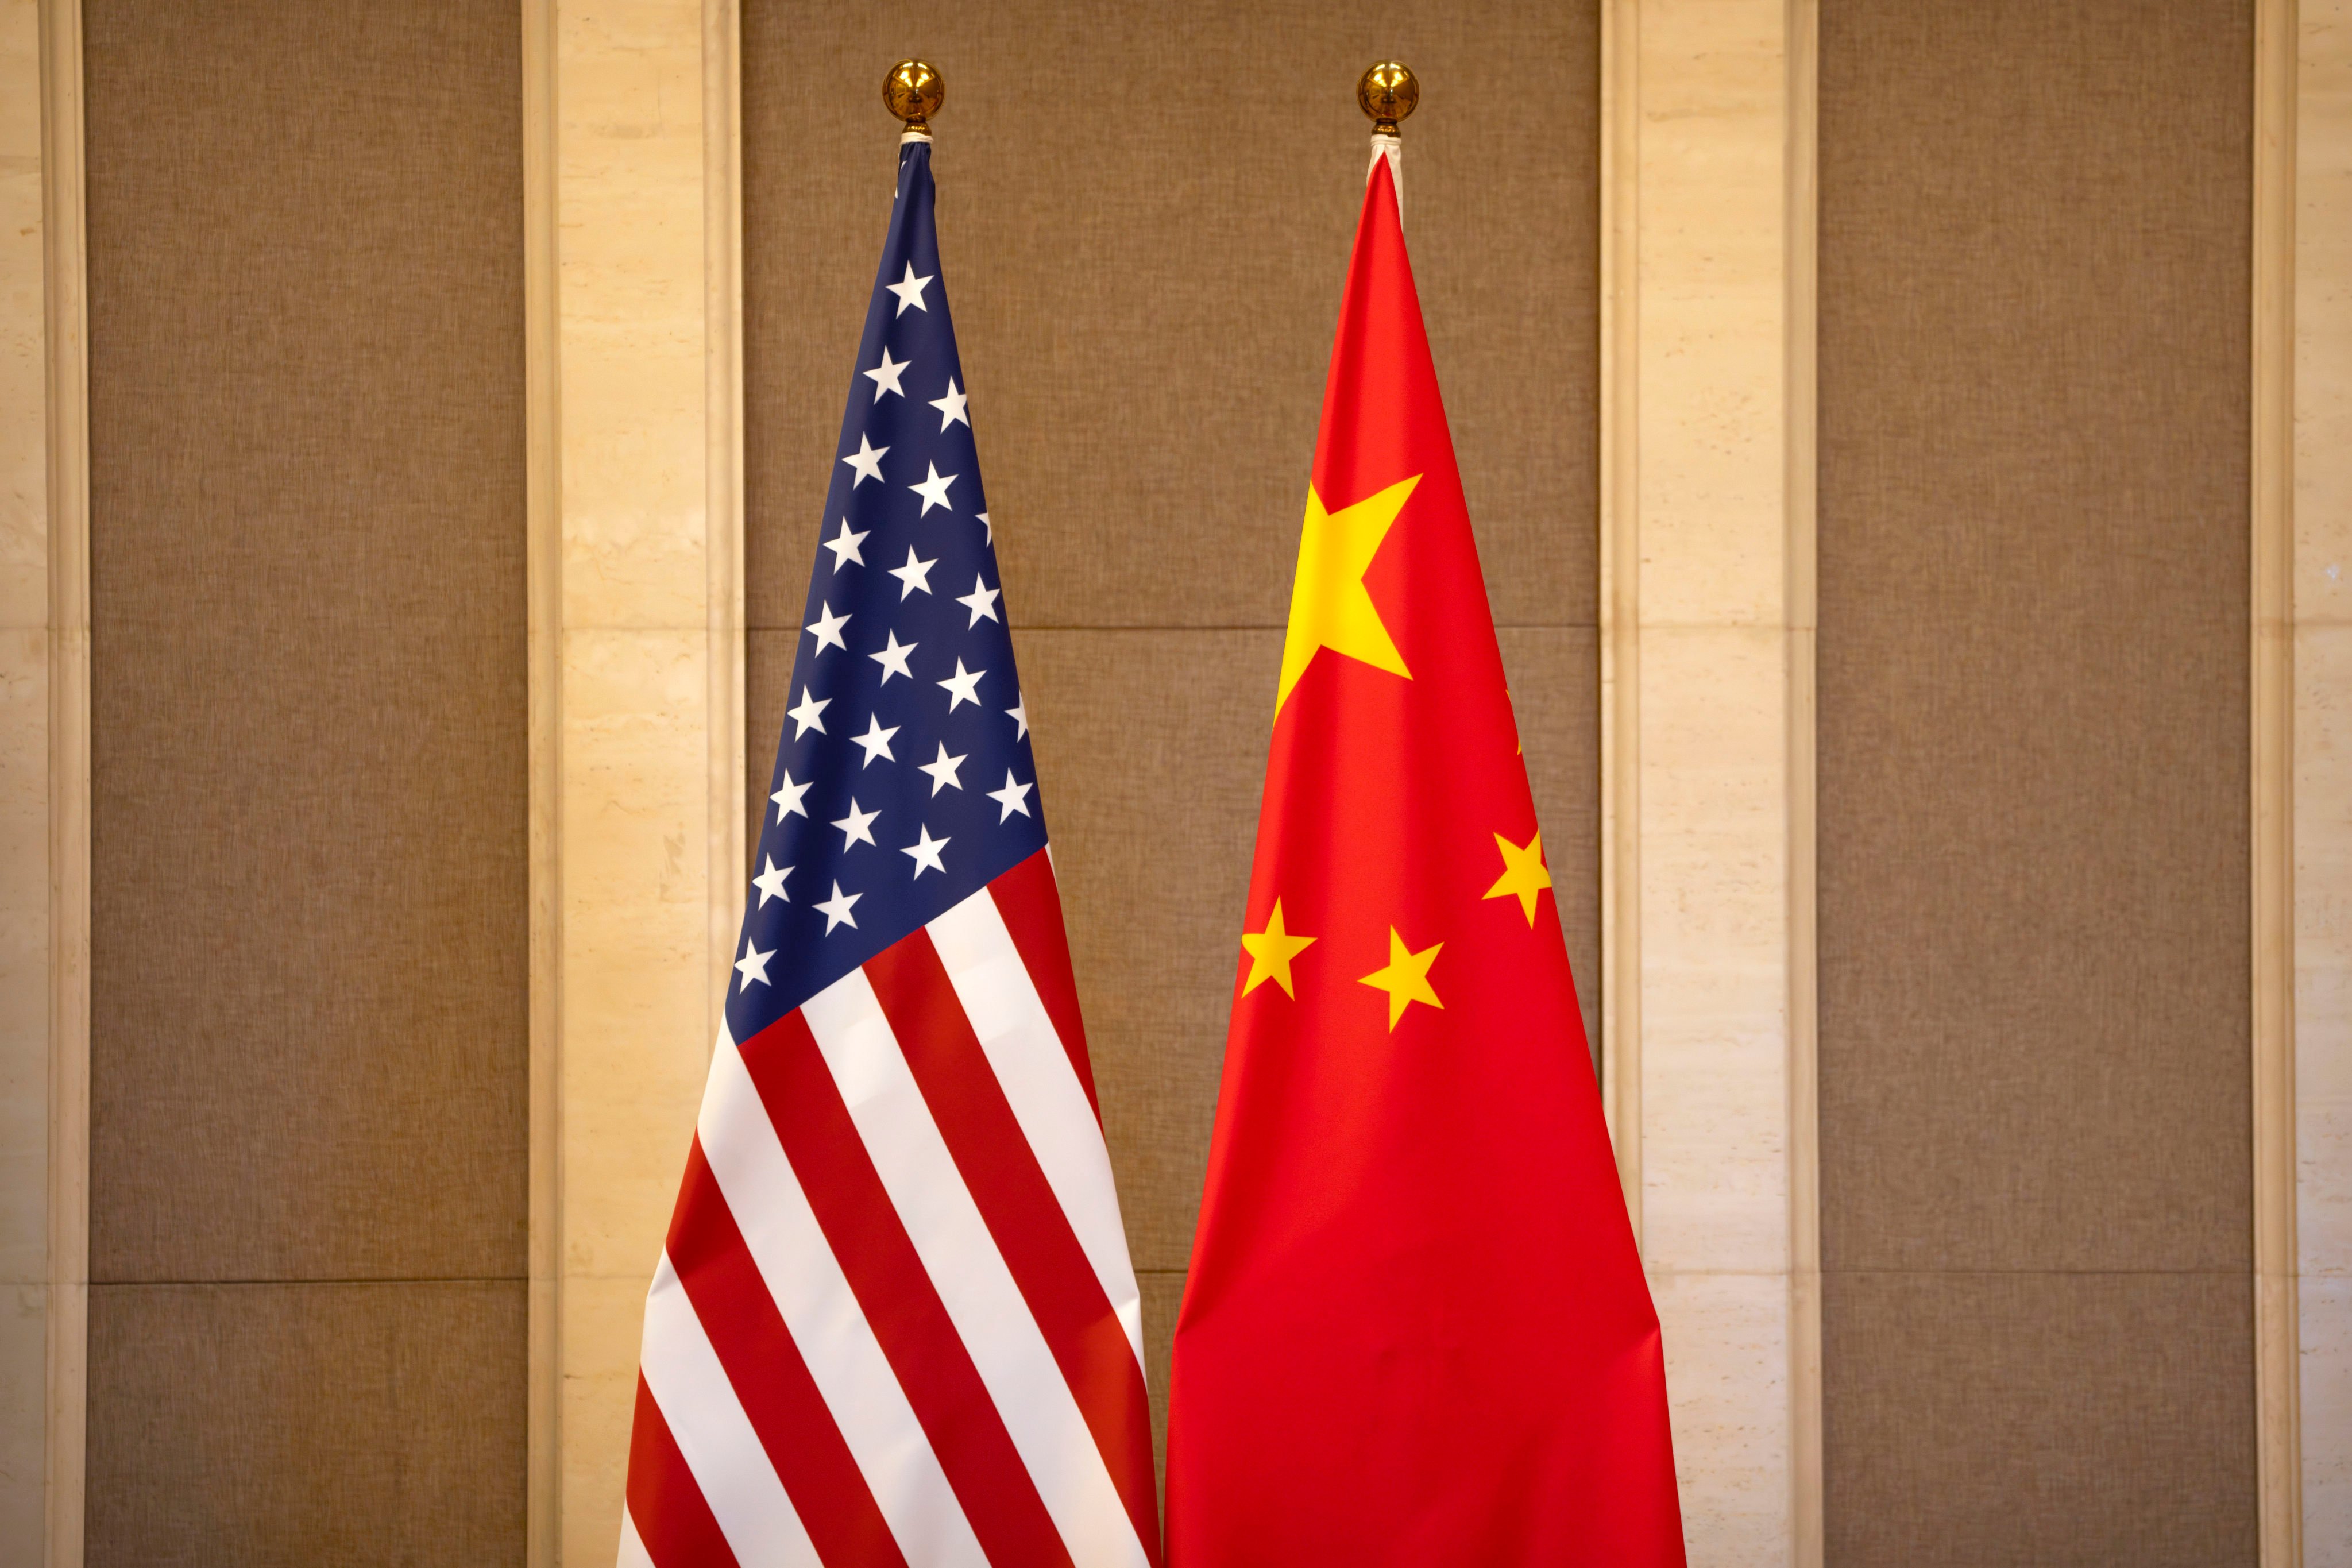 United States and Chinese flags are set up before a meeting between US Treasury Secretary Janet Yellen and Chinese Vice Premier He Lifeng at the Diaoyutai State Guesthouse in Beijing in July. Photo: AP